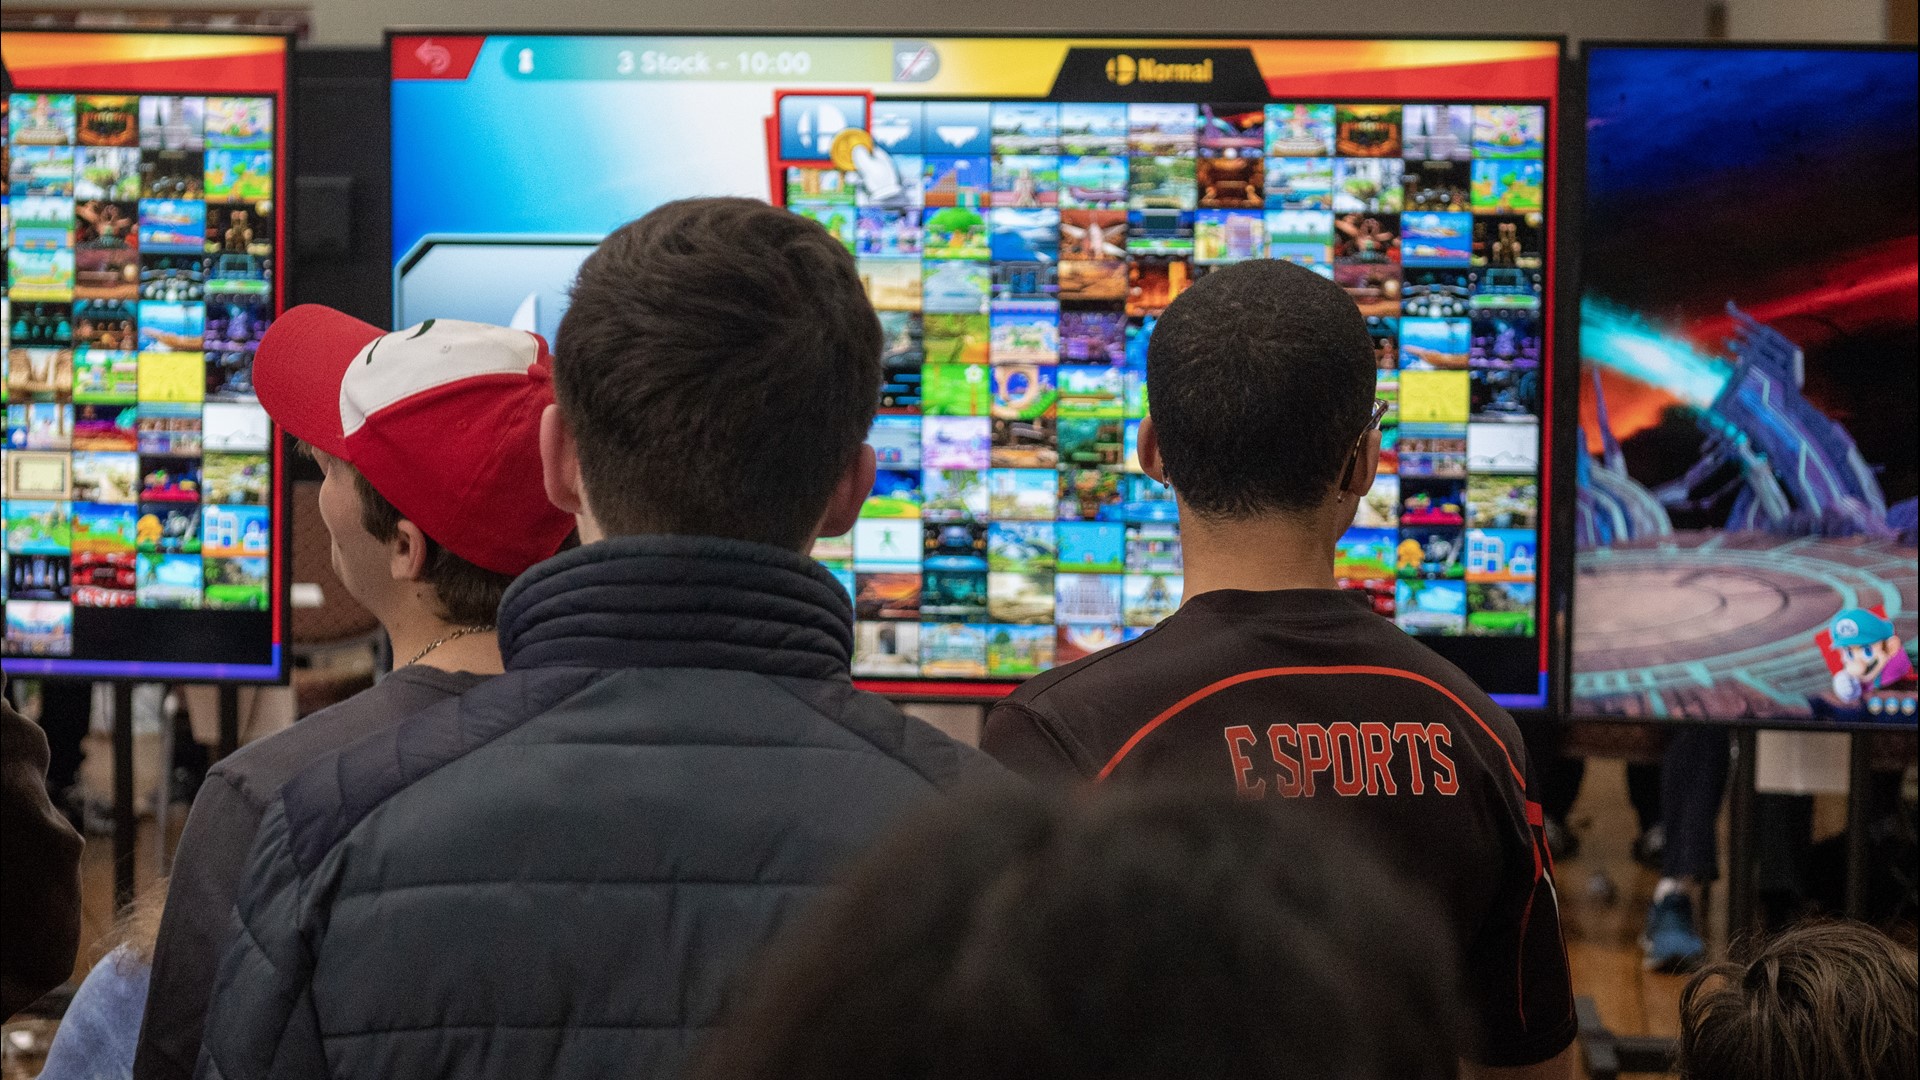 The tournament featured 170 video gamers representing 15 high schools with teams competing in "League of Legends," "Rocket League" and "Super Smash Bros."